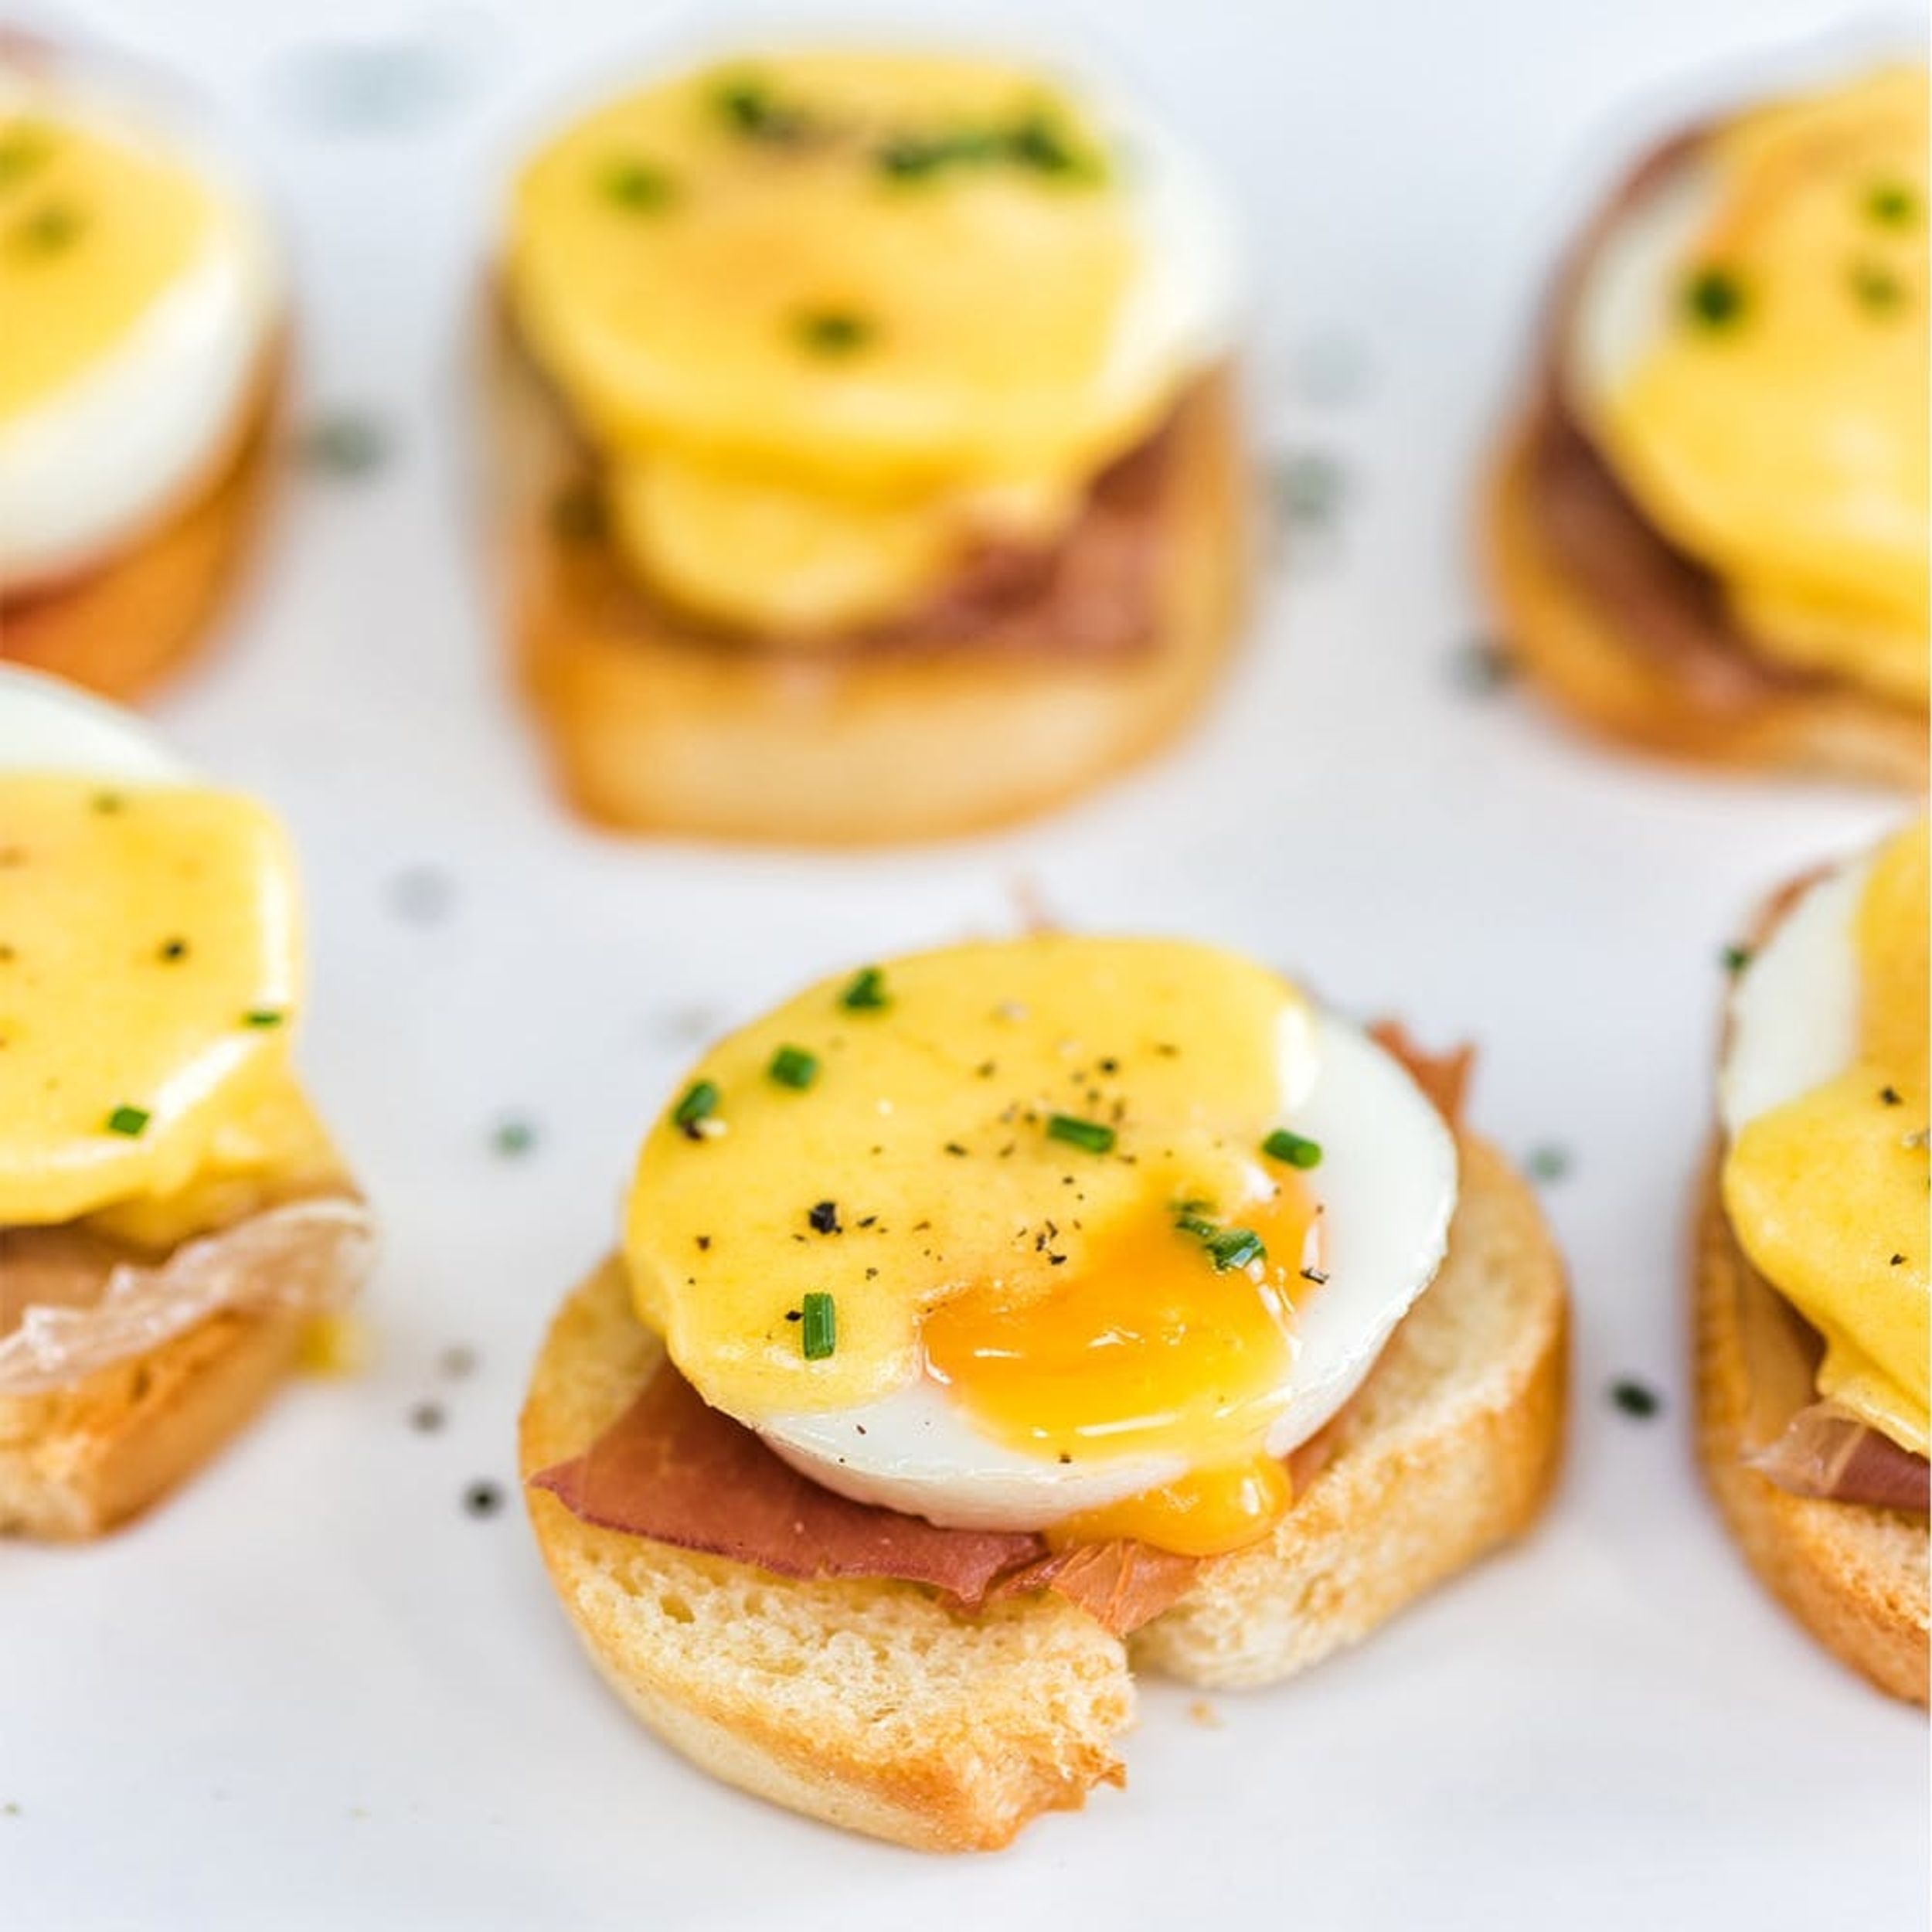 Level Up Your Brunch With This Bite-Sized Eggs Benedict Recipe